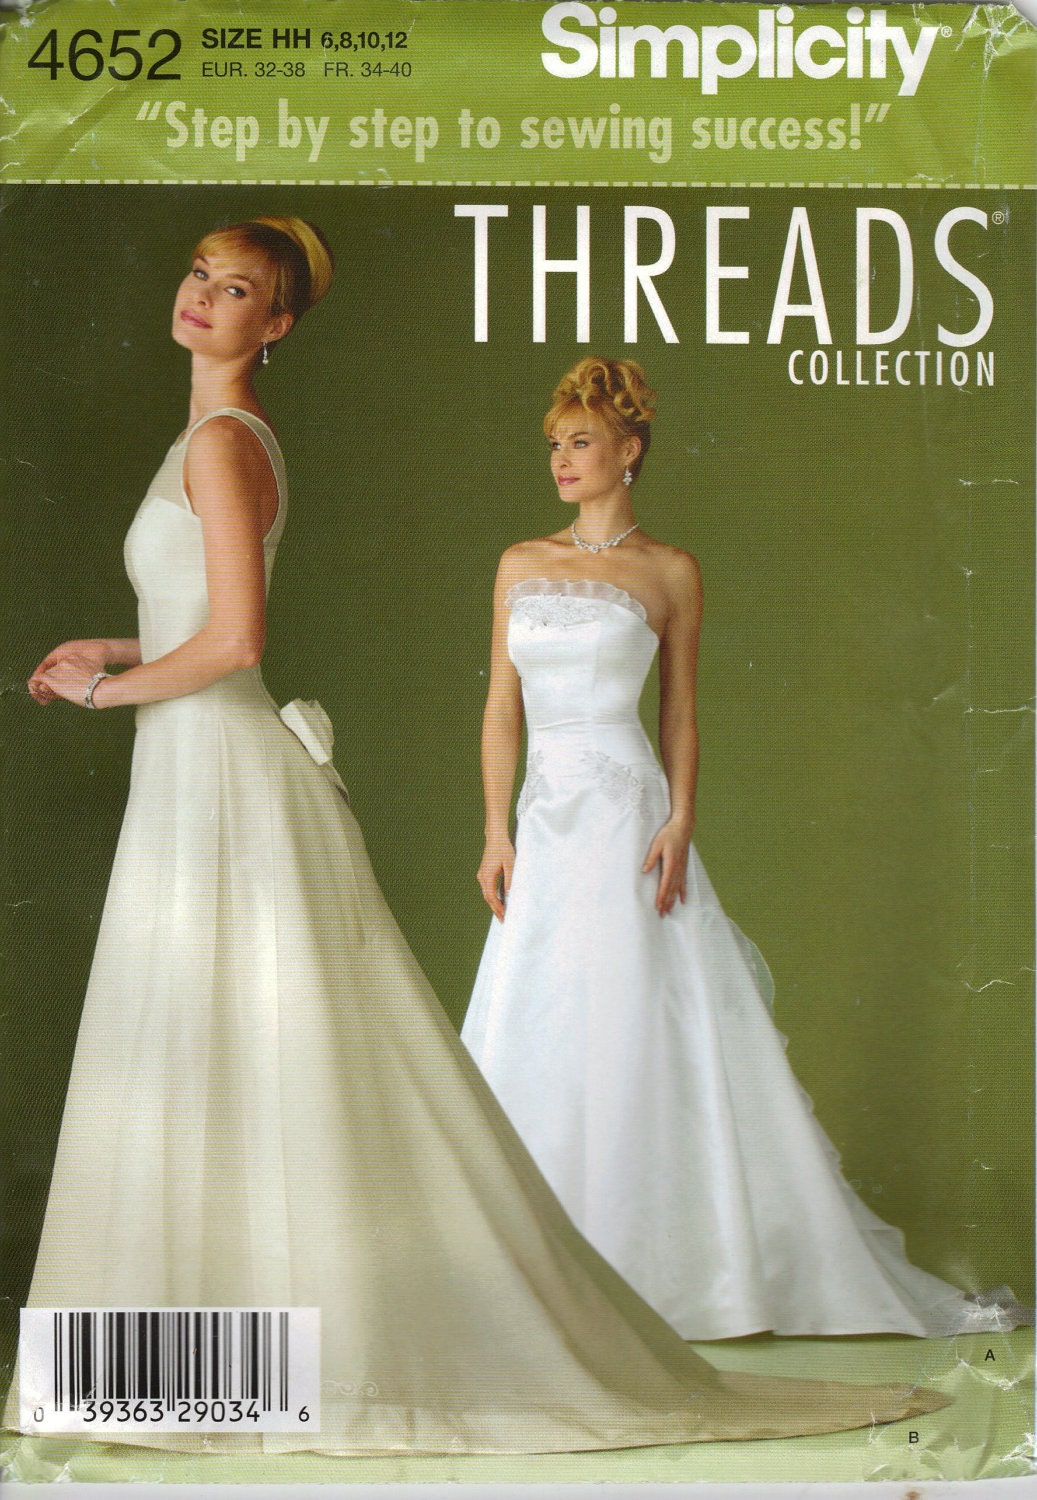 Simplicity Sewing Pattern 4652 - Misses' Wedding Dress (6-12)